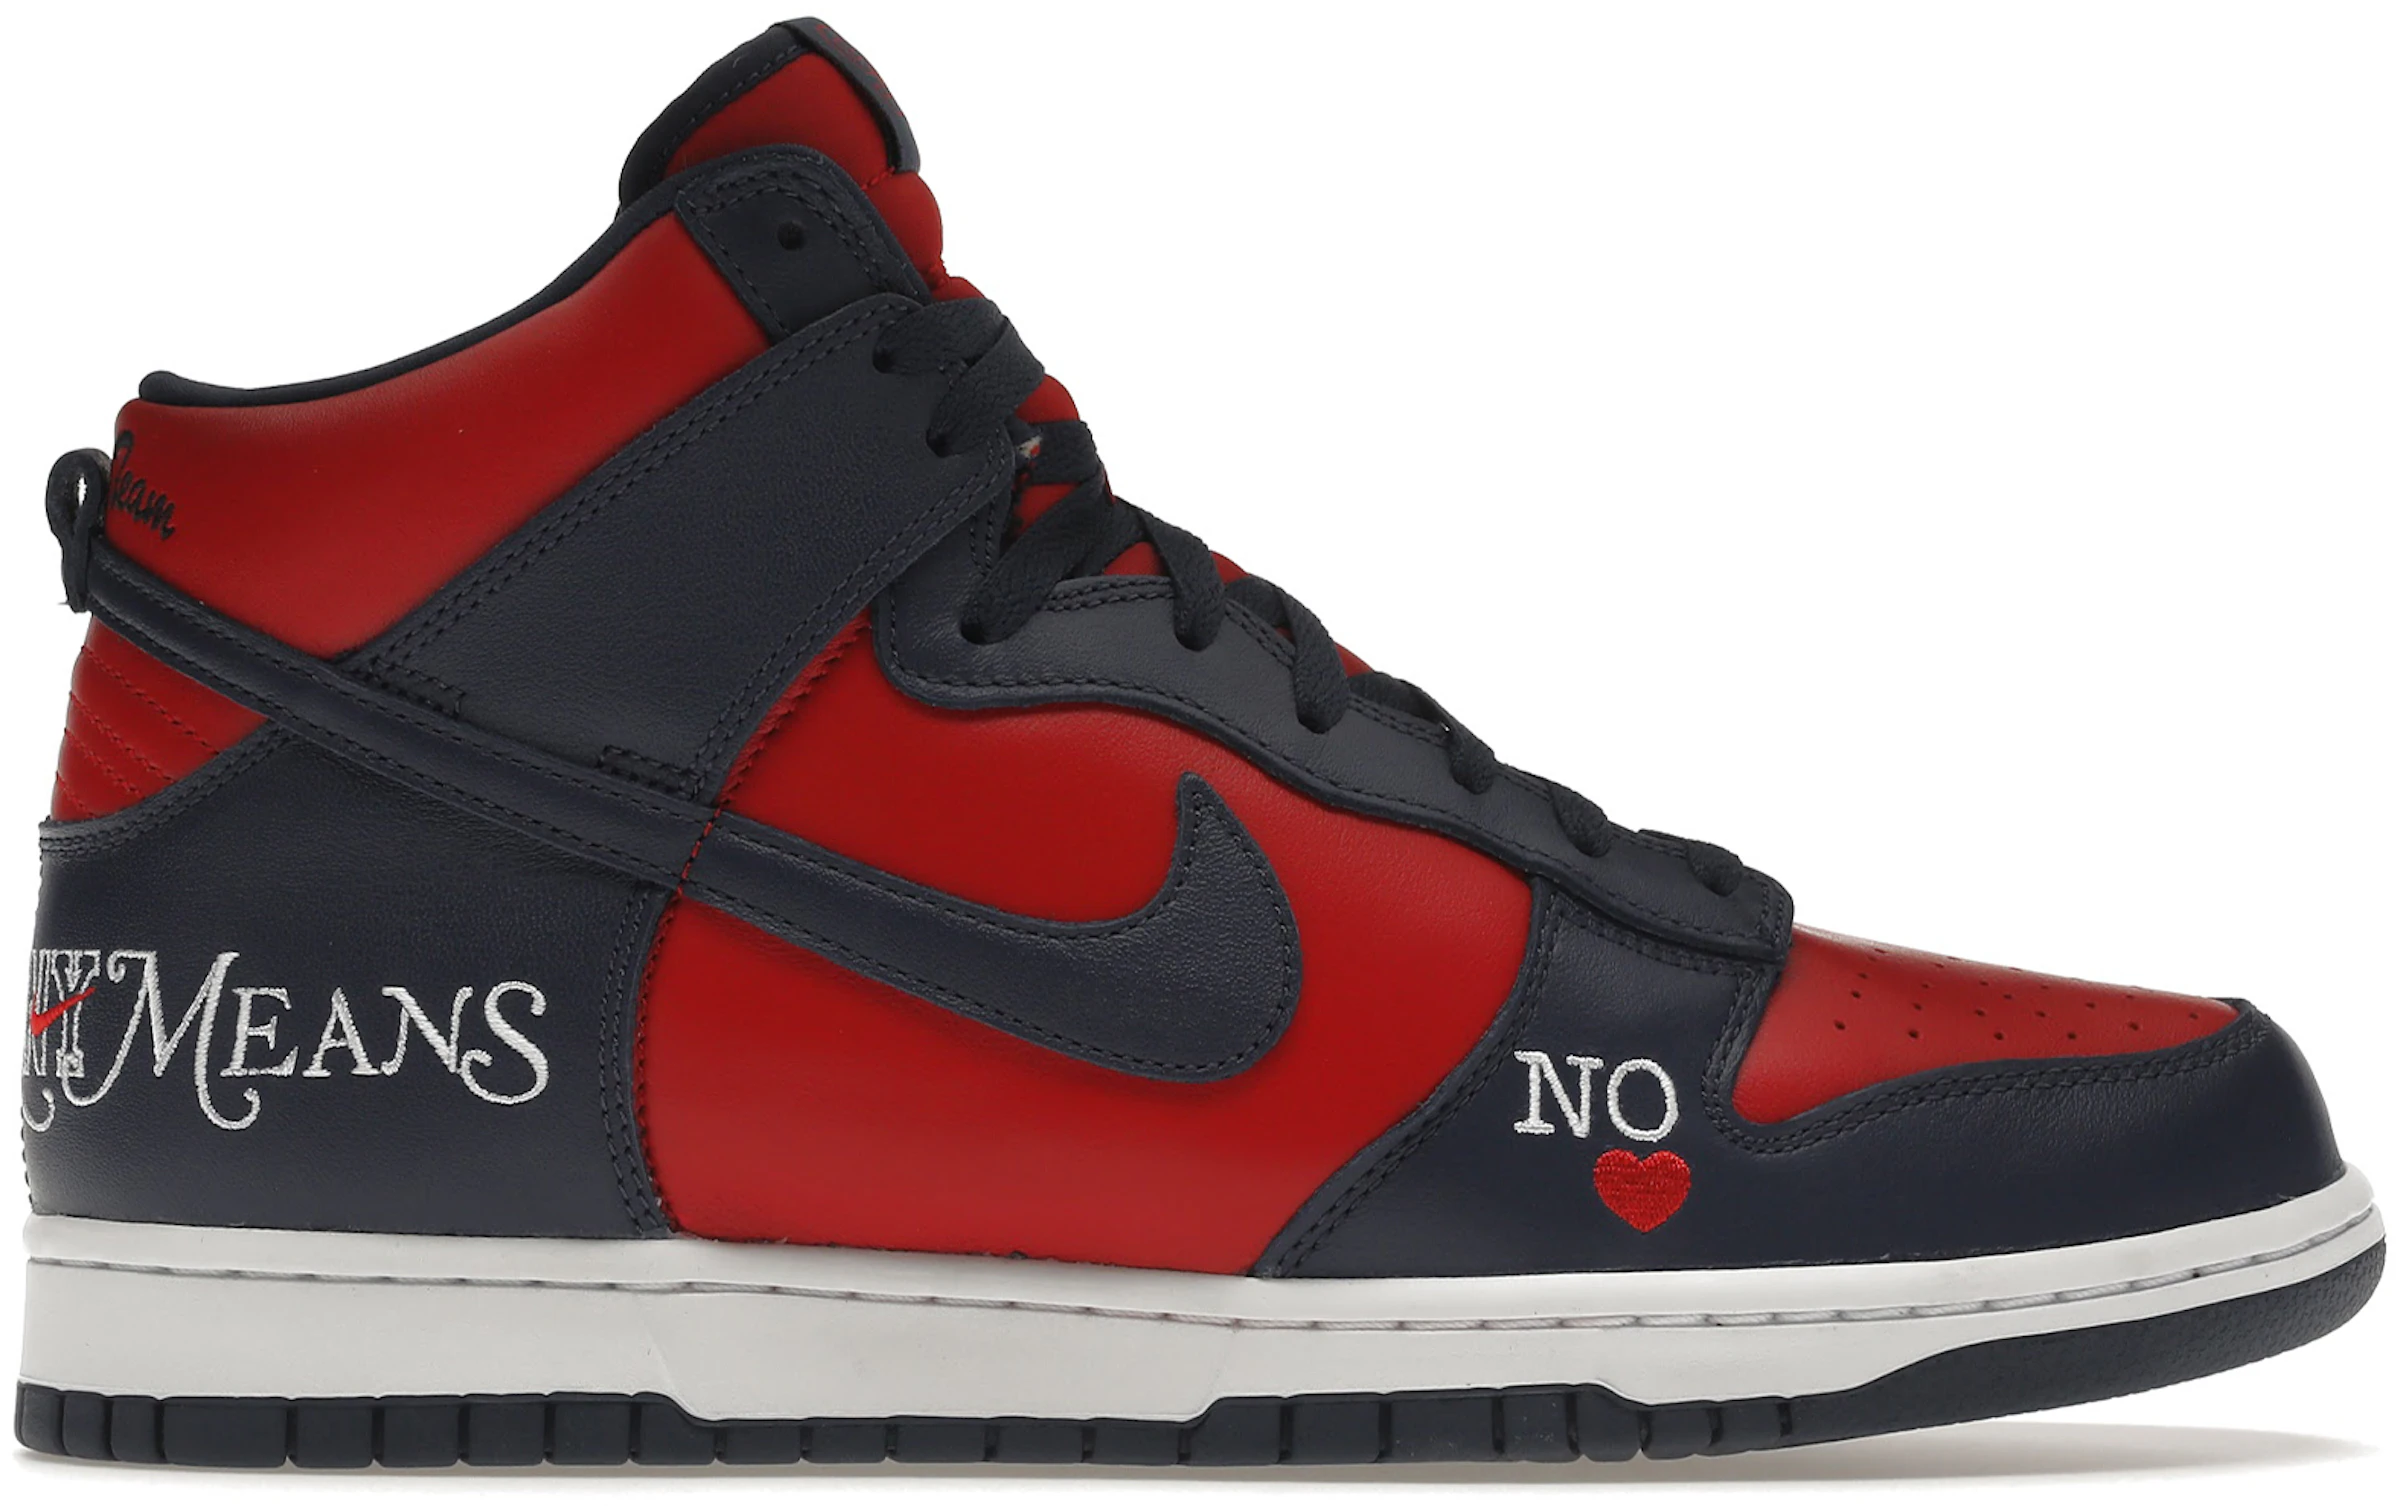 Dunk High Supreme By Any Means Navy - DN3741-600 - US